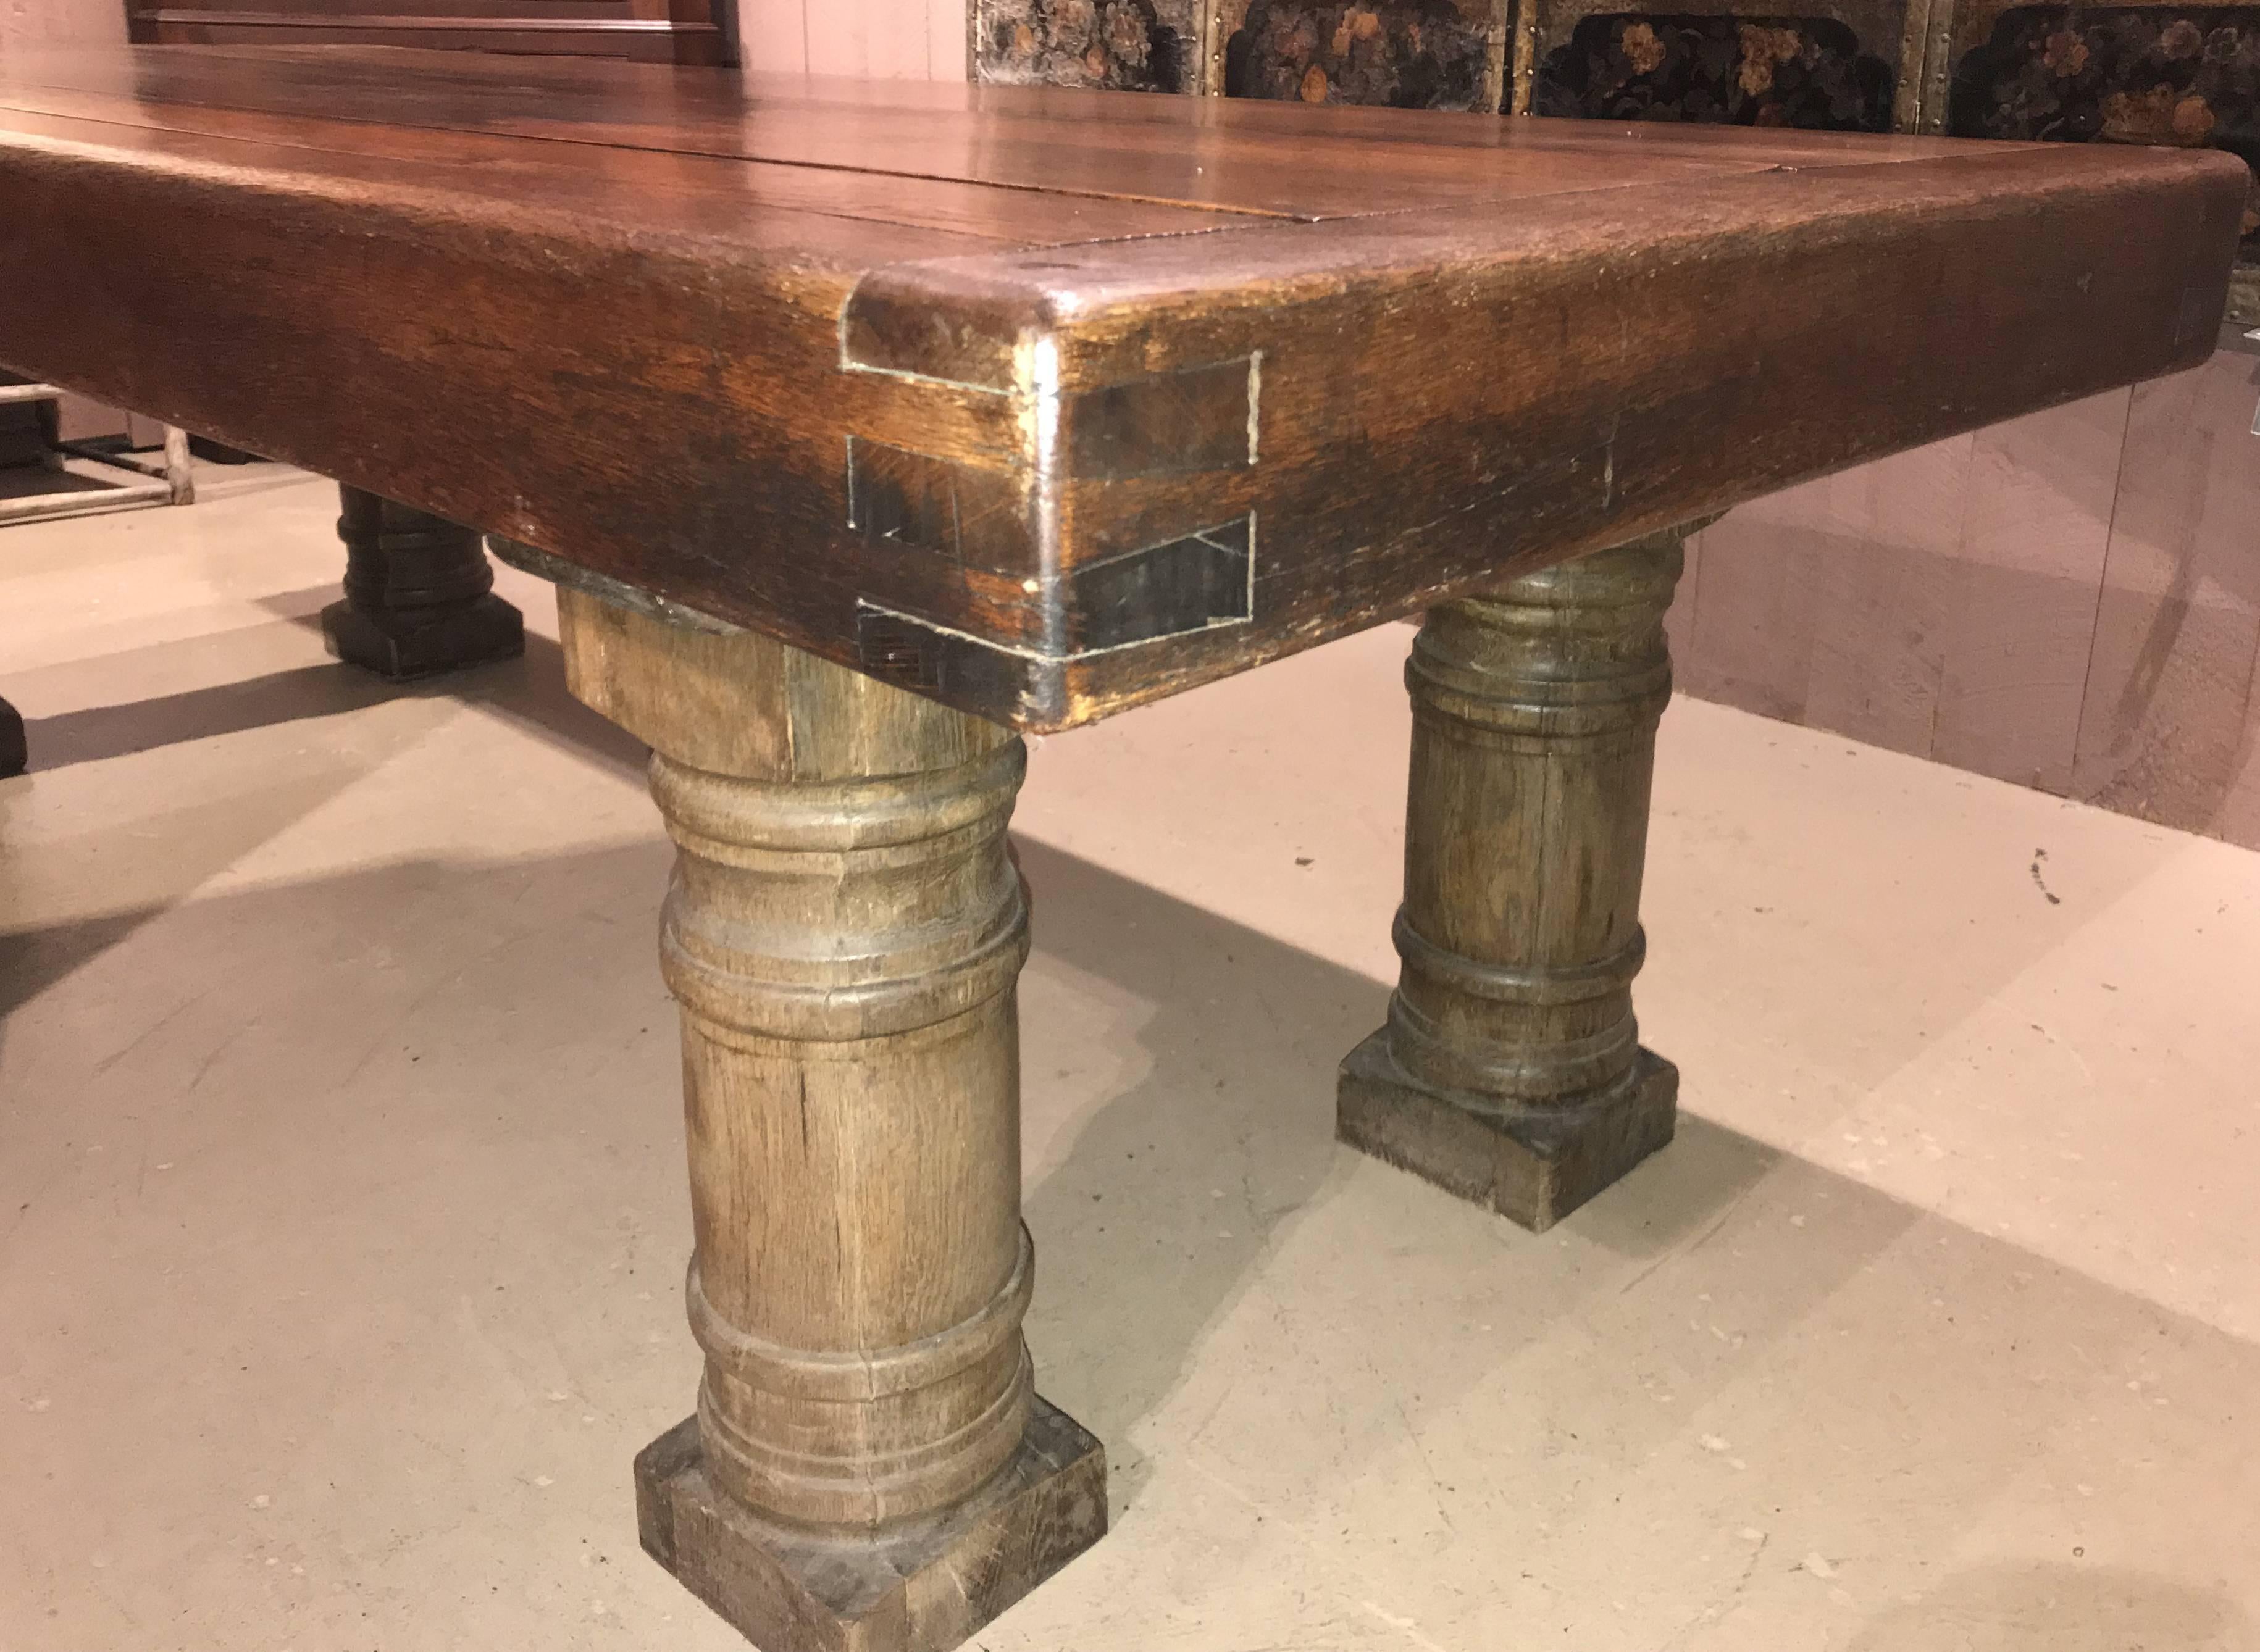 A solid two part oak refectory table with boldly turned legs and top with jointed and pinned corners. Continental in origin, dating to the 19th century. Very good overall condition with great patina, and a few shrinkage cracks running the length of